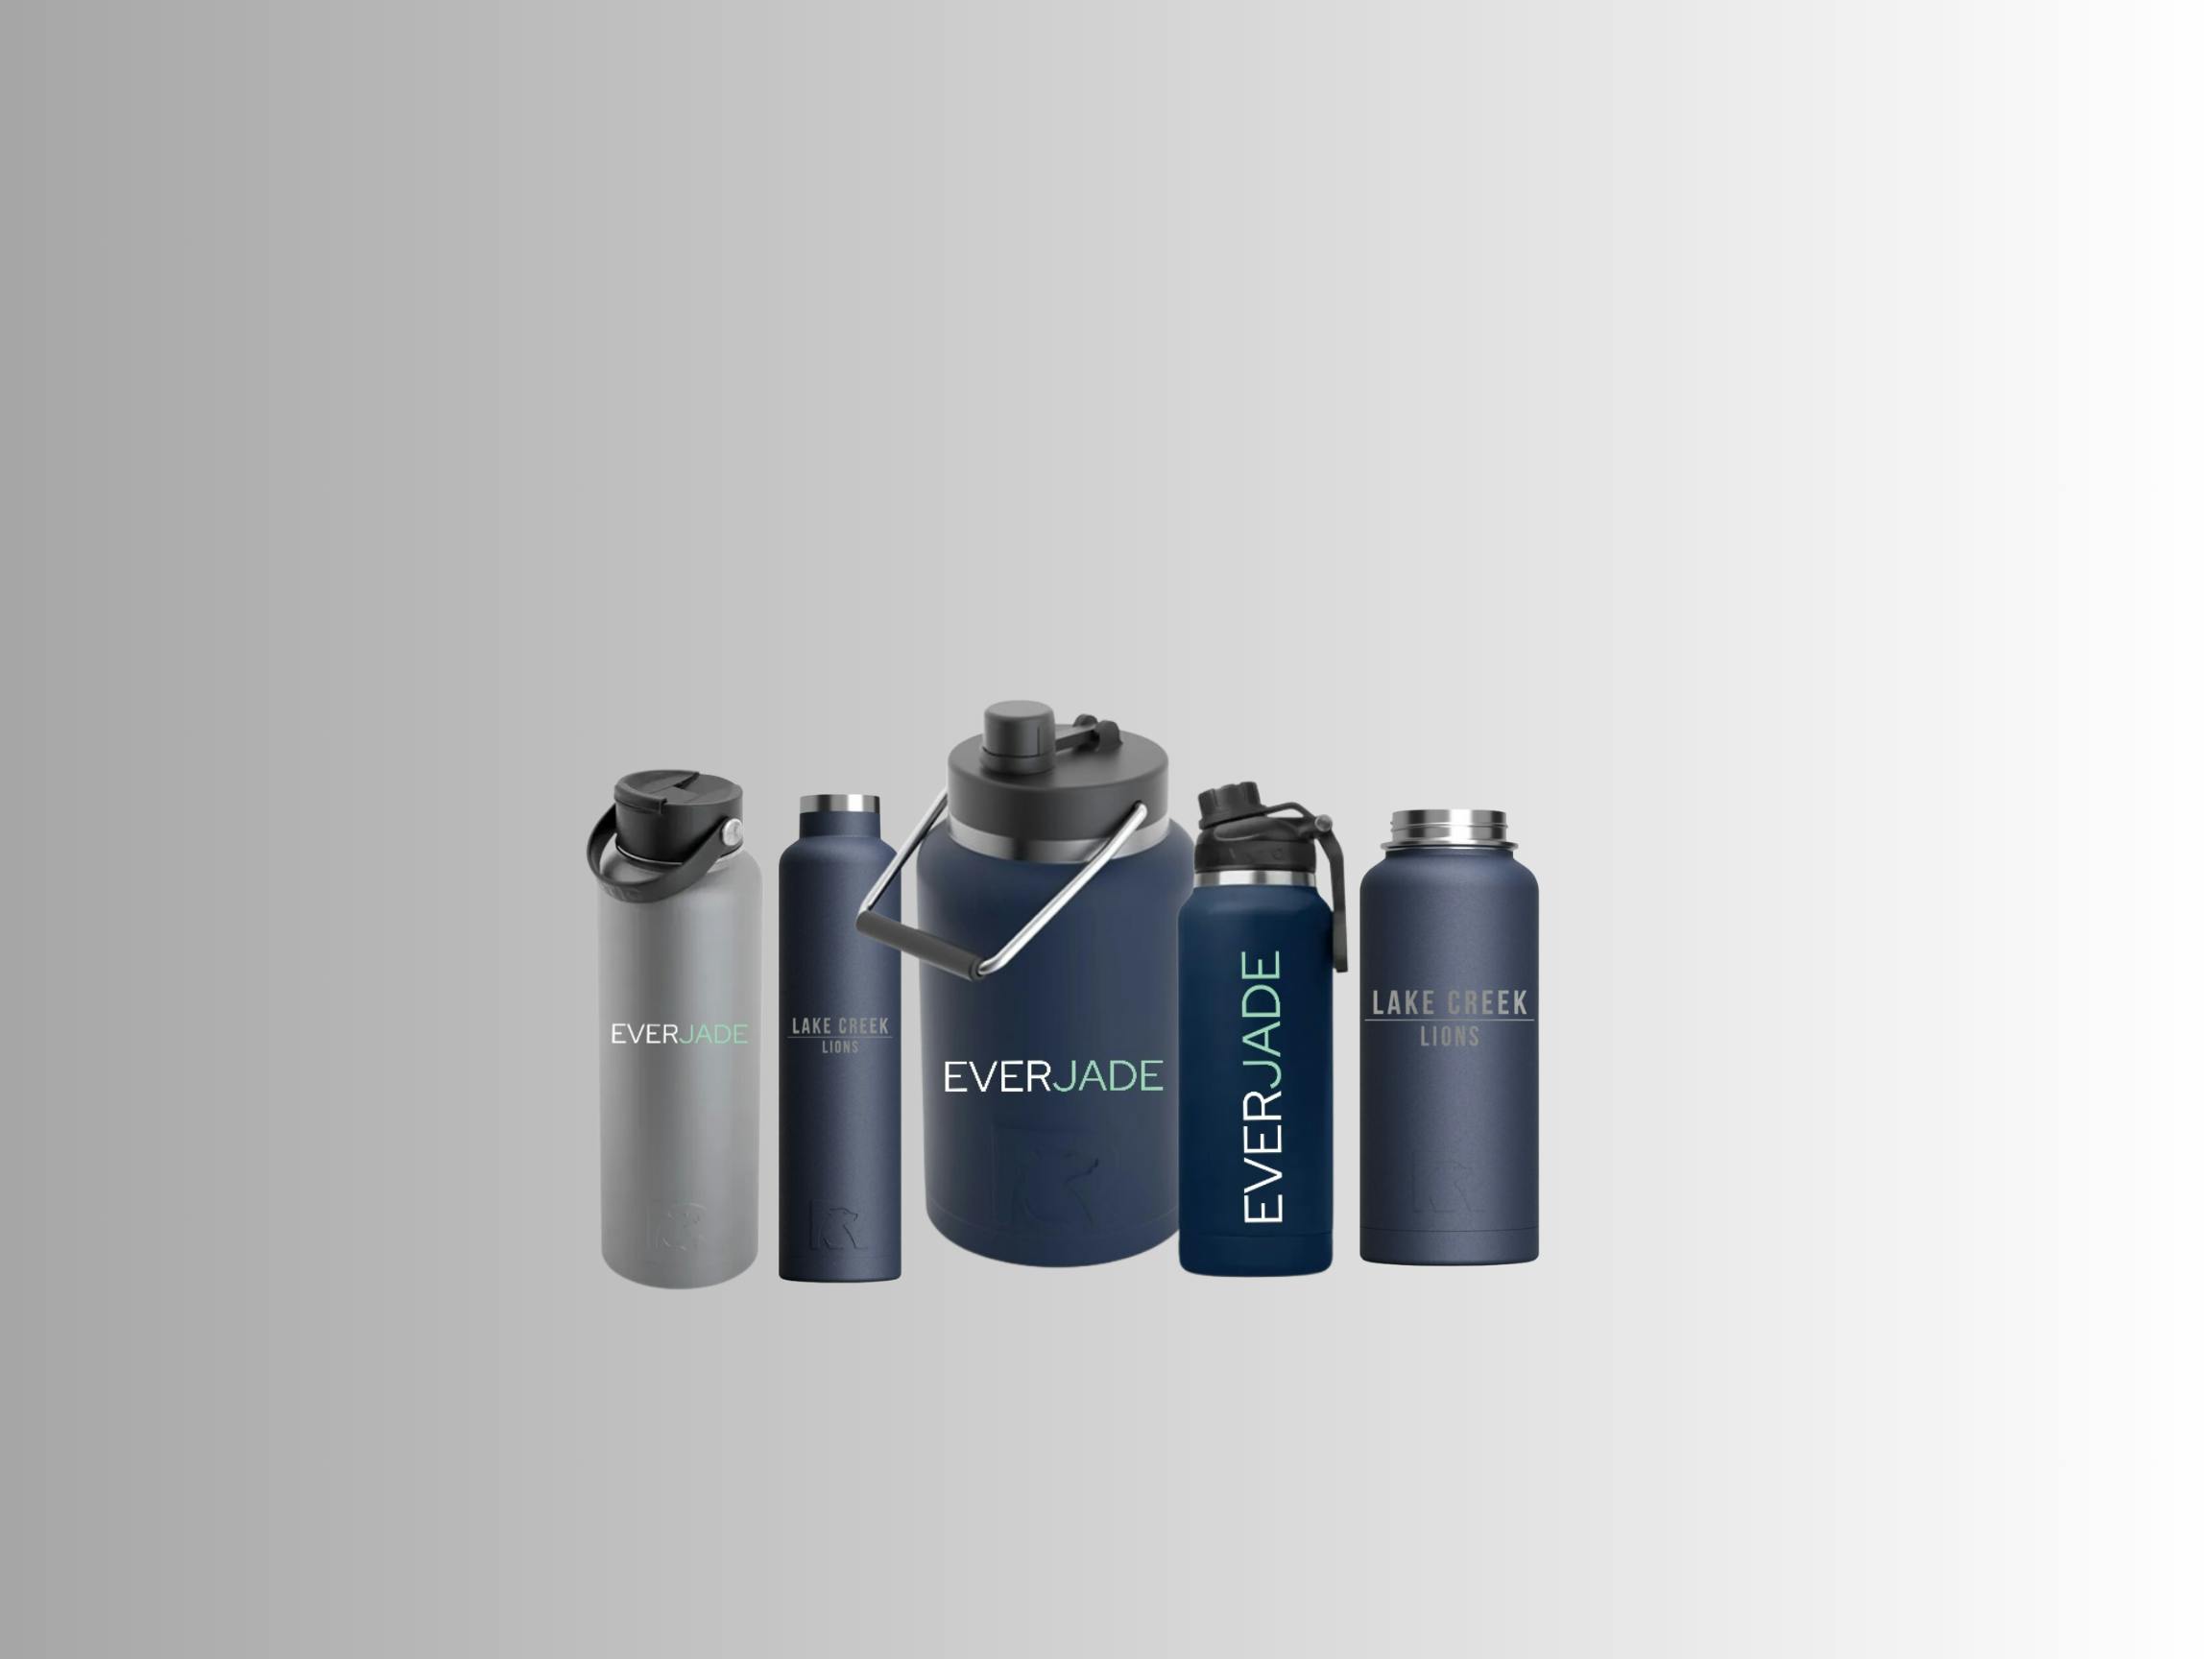 Variety of water bottle options